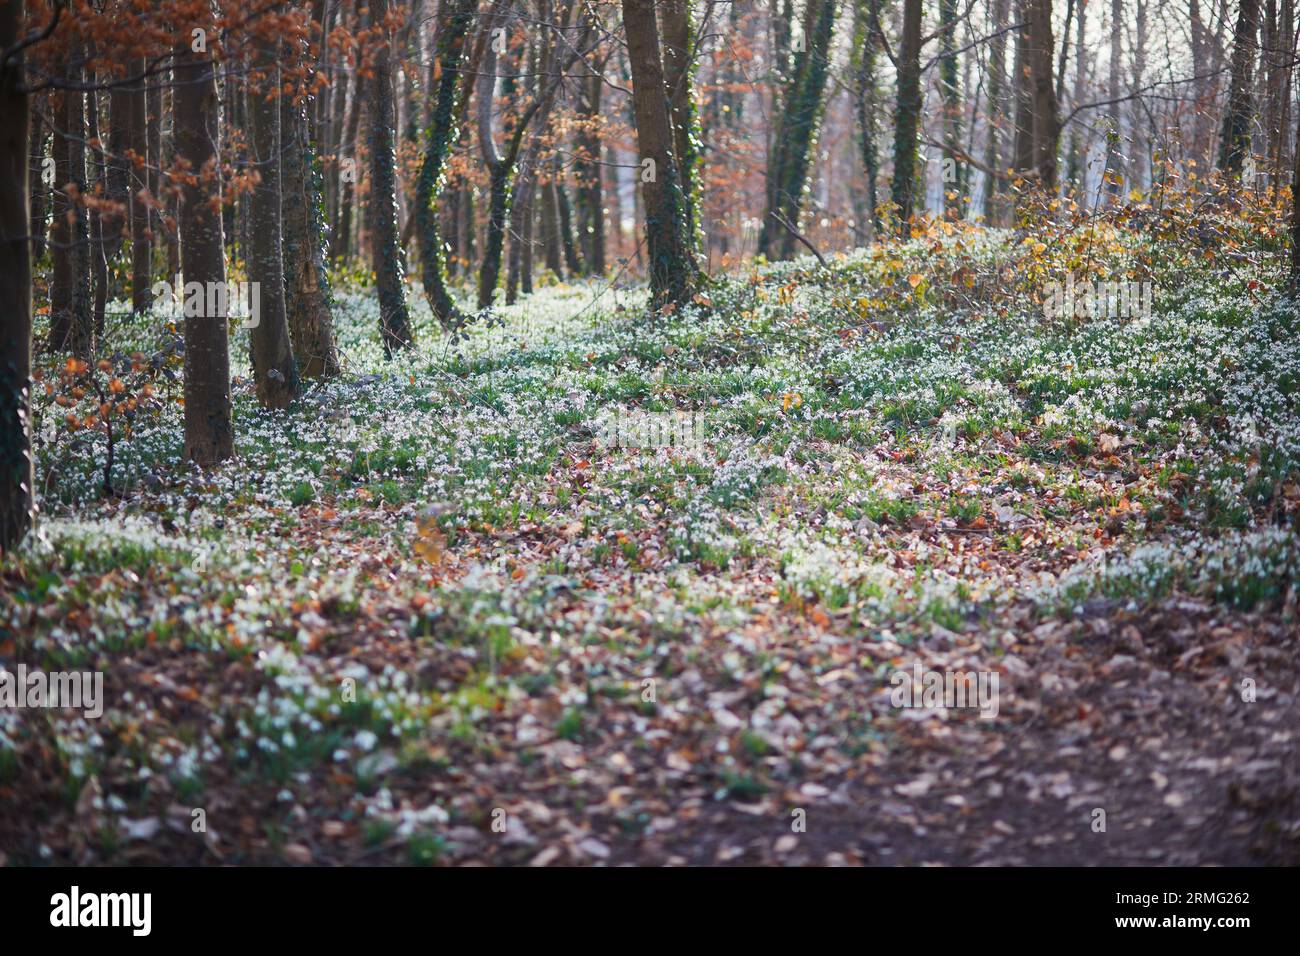 Carpet of white fresh snowdrops in spring forest. Tender spring galanthus flowers symbolize the arrival of spring. Scenic view of the spring forest wi Stock Photo